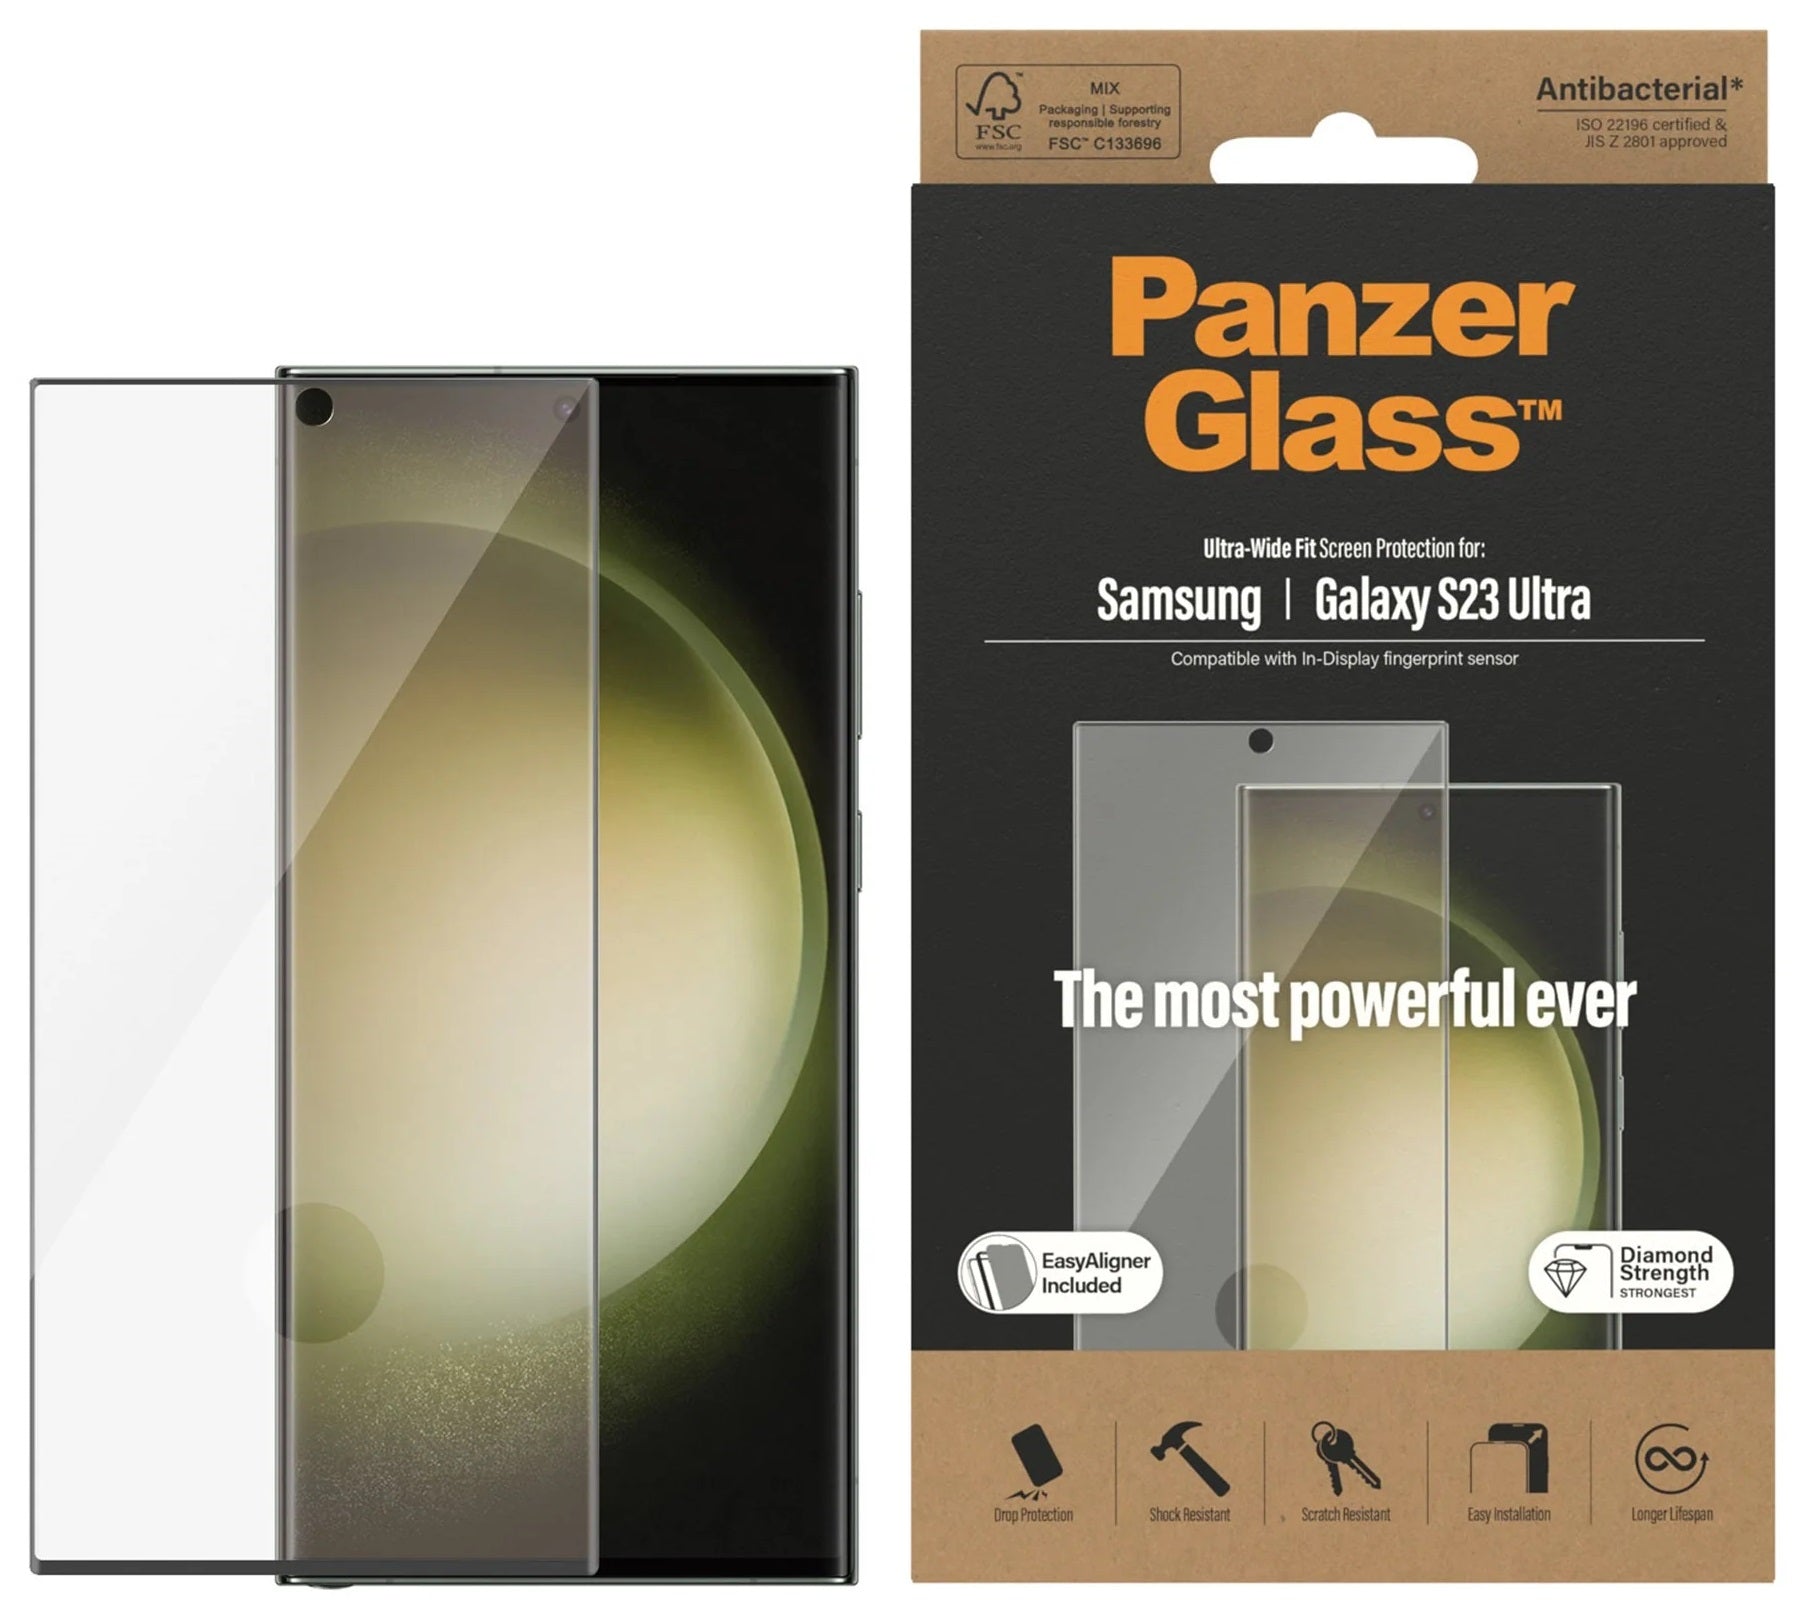 PanzerGlass Samsung Galaxy S23 Ultra 5G (6.8") Screen Protector Ultra-Wide Fit - (7317), Scratch  Shock Resistant, Drop Protection,Antibacterial, 2YR-0